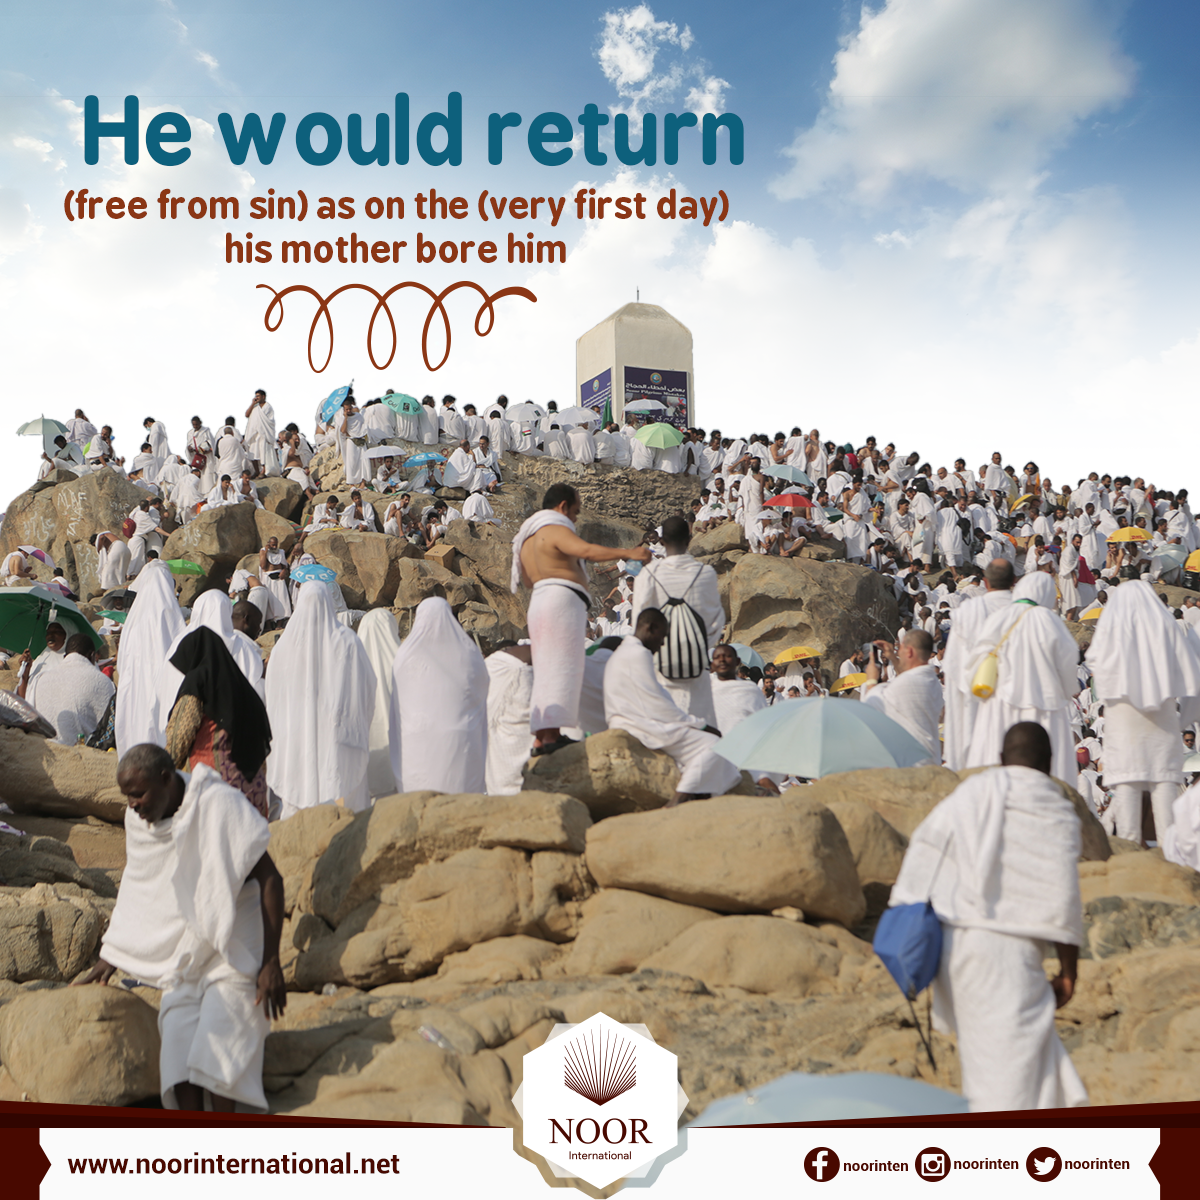 He would return (free from sin) as on the (very first day) his mother bore him.